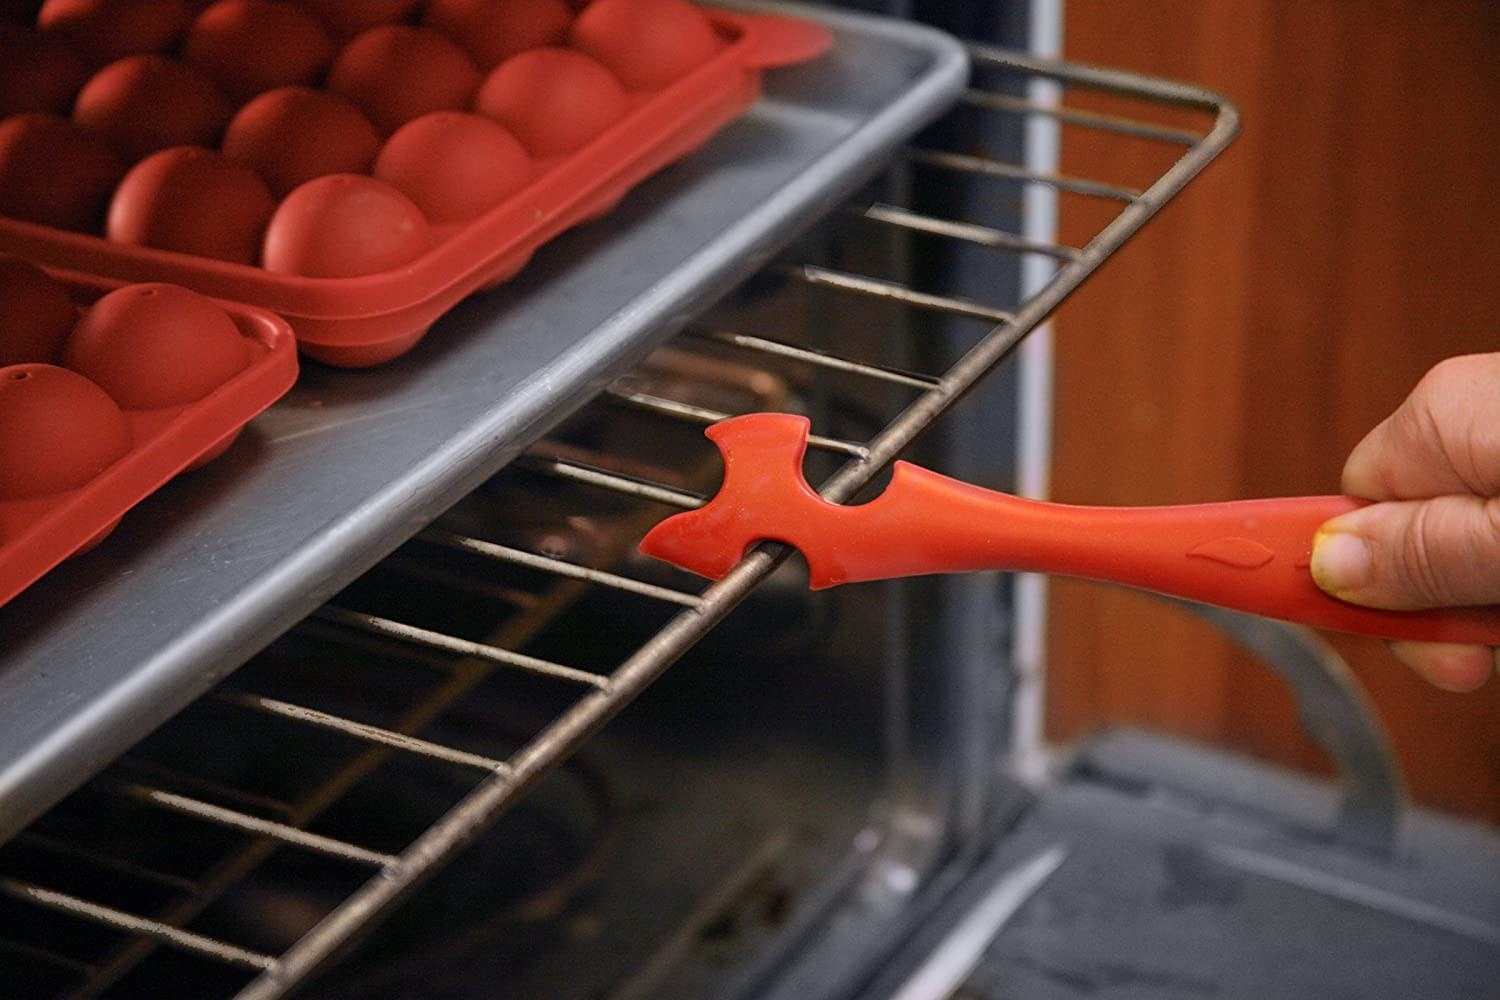 A person pulling out an oven rack with the tool